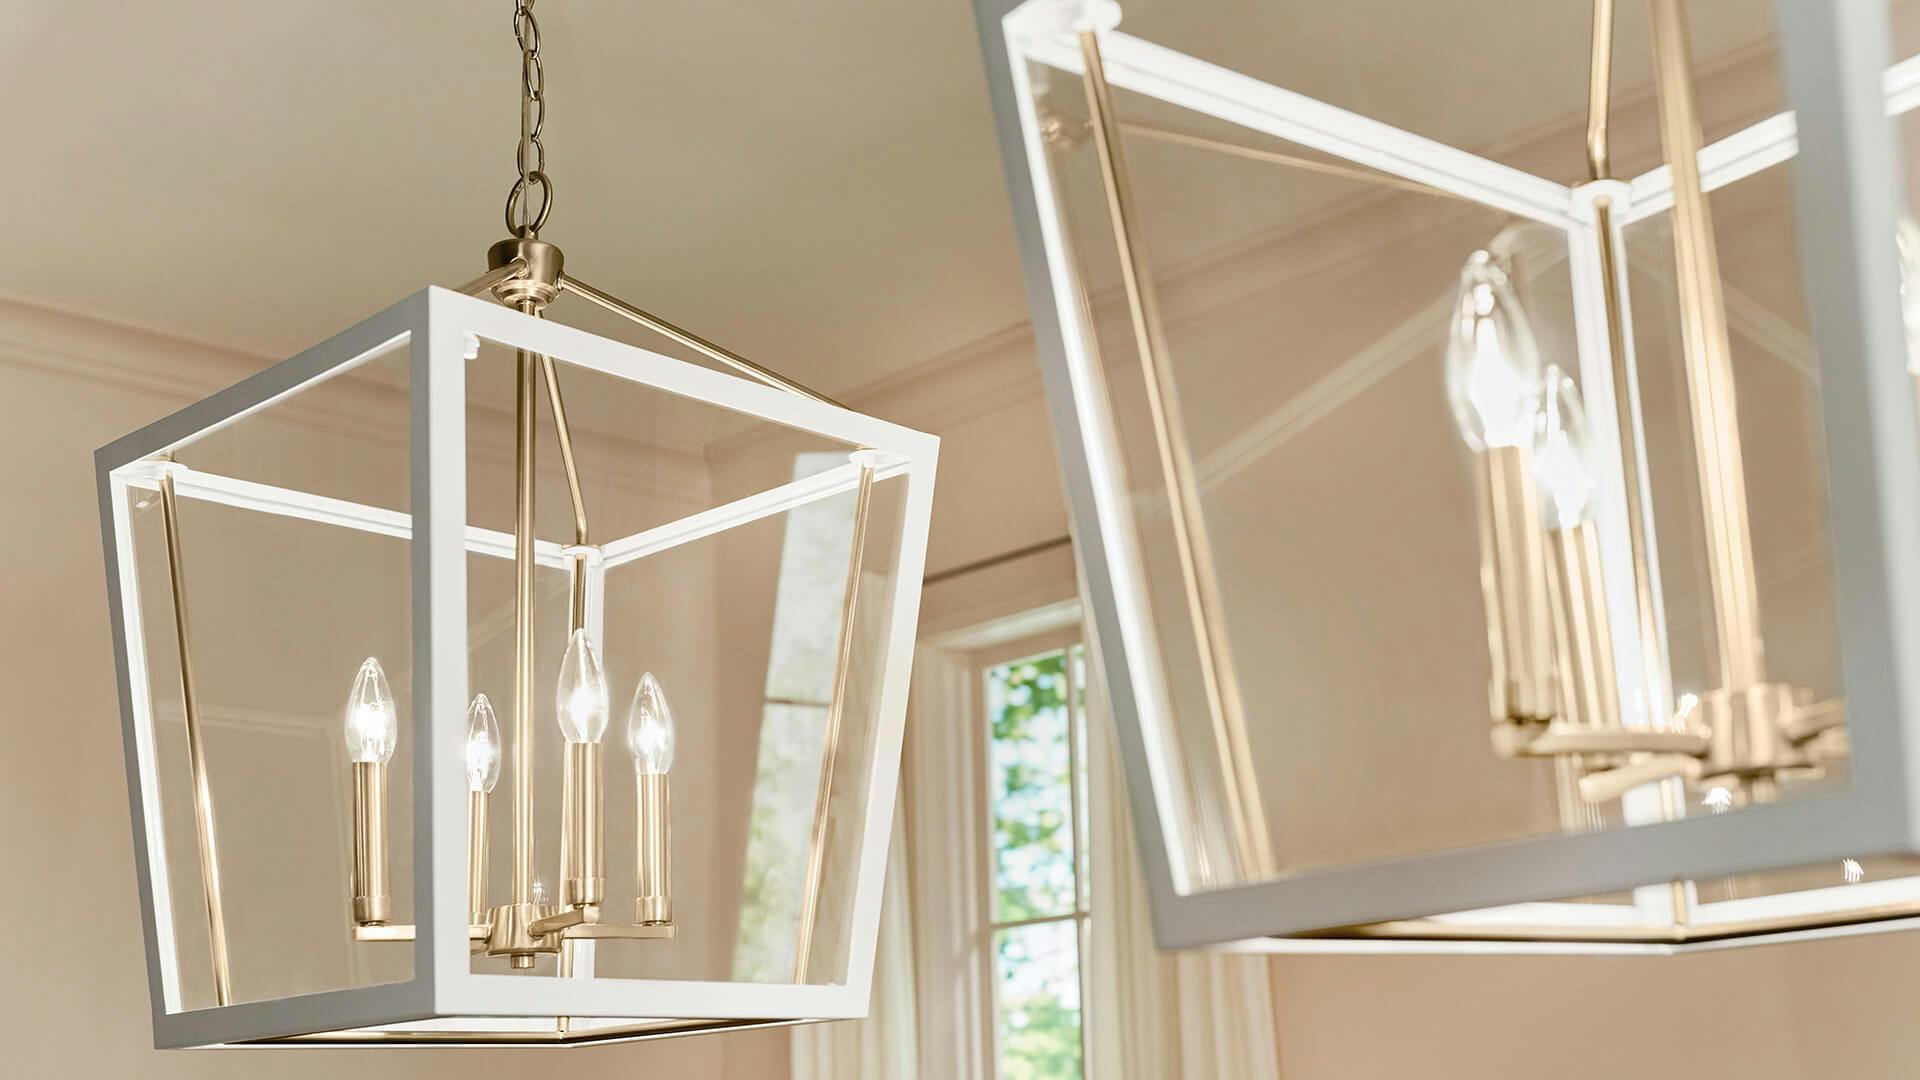 Two delvin pendant lights in white and gold finish hanging